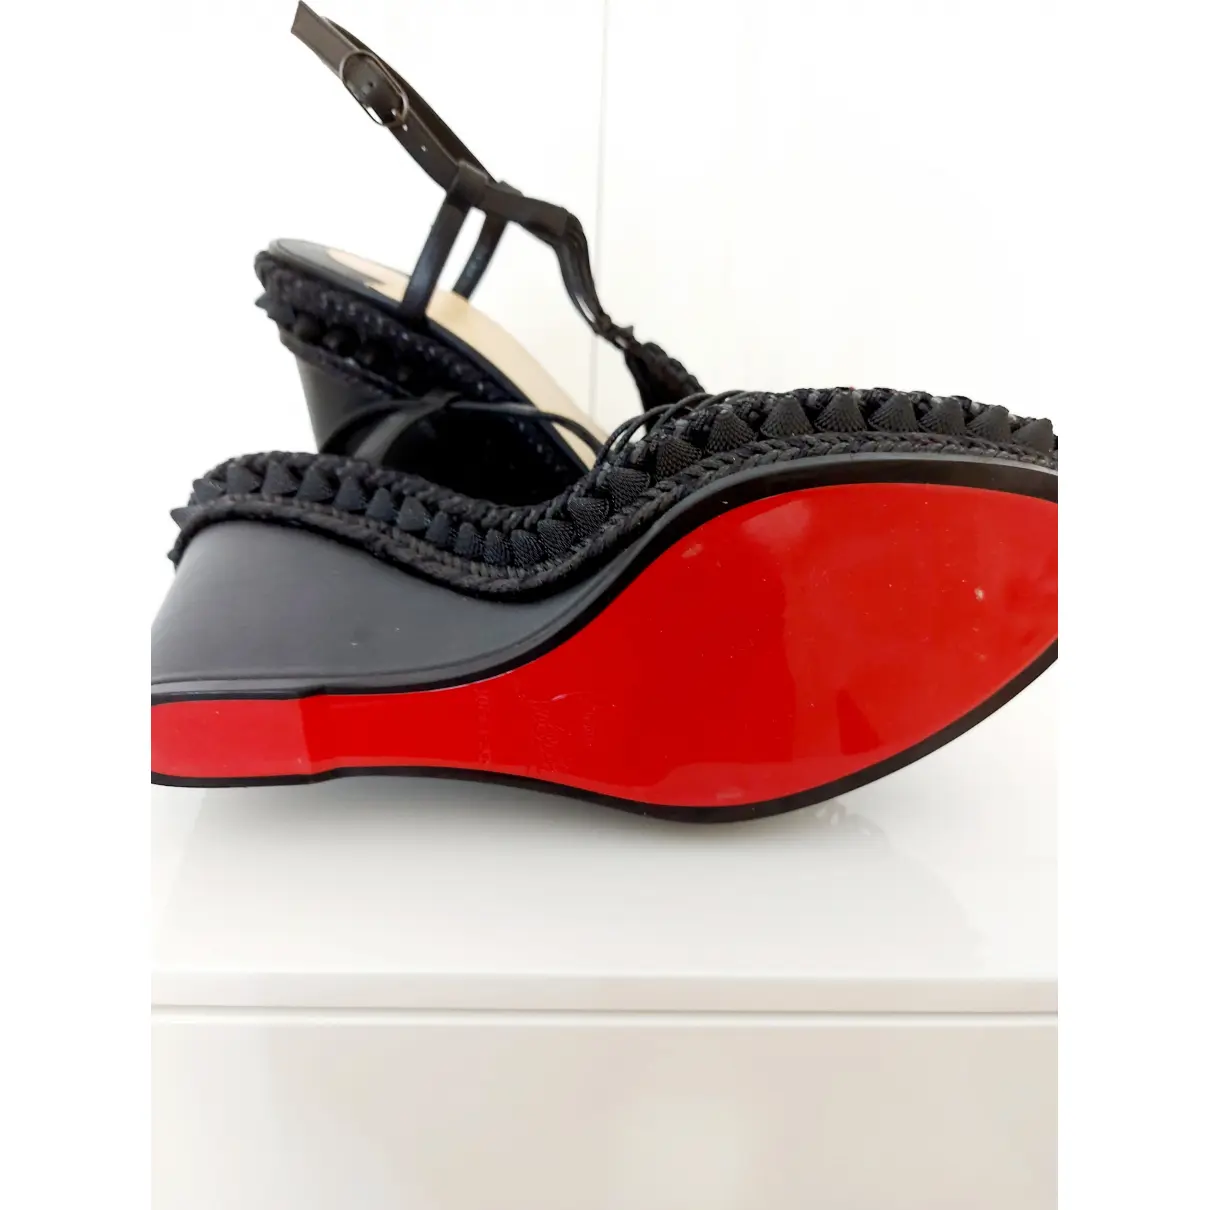 Spikaqueen leather sandals Christian Louboutin